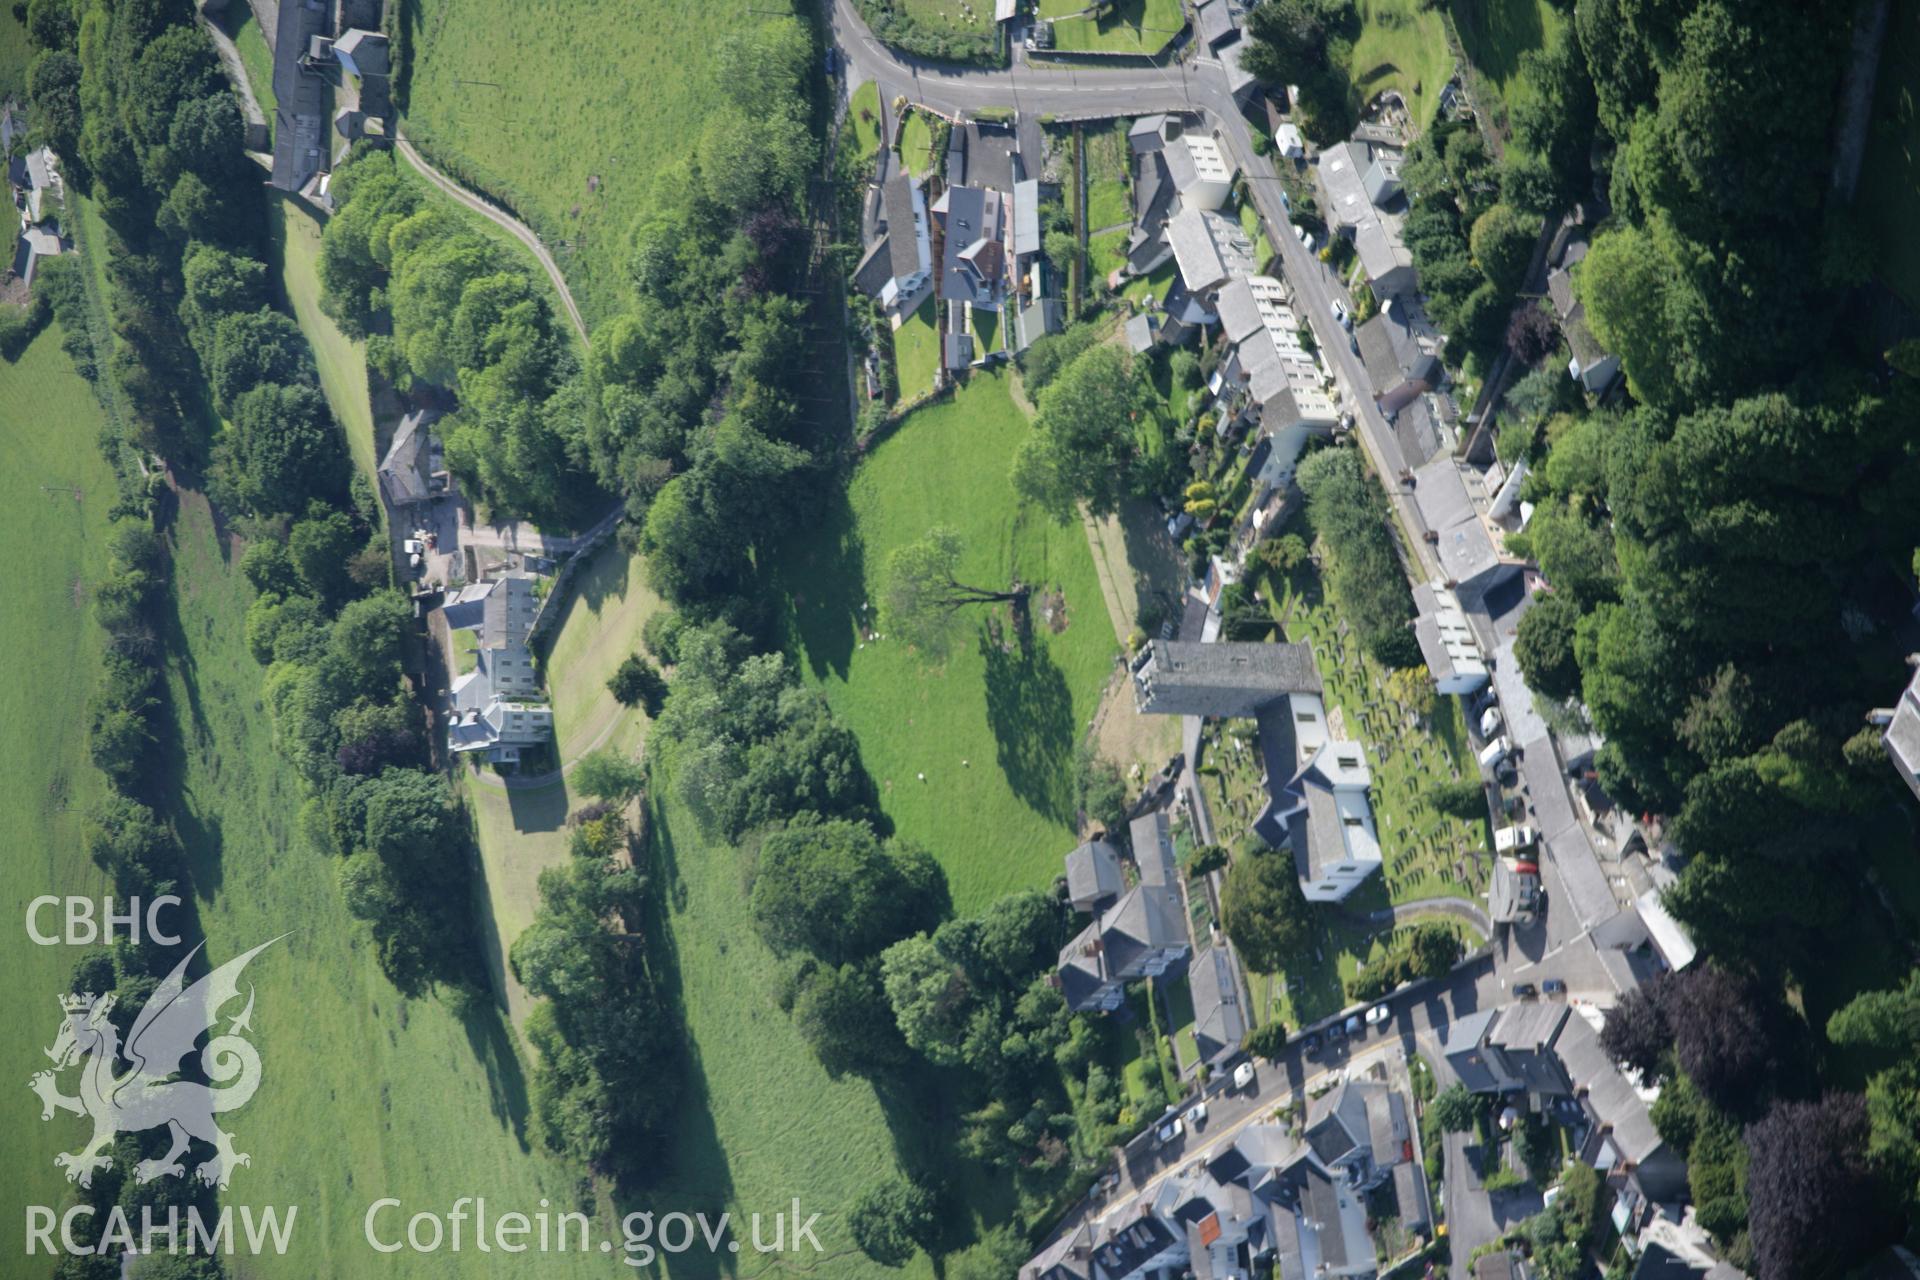 RCAHMW colour oblique aerial photograph of St Stephen's Church, Llanstephan, from the north-east. Taken on 09 June 2005 by Toby Driver